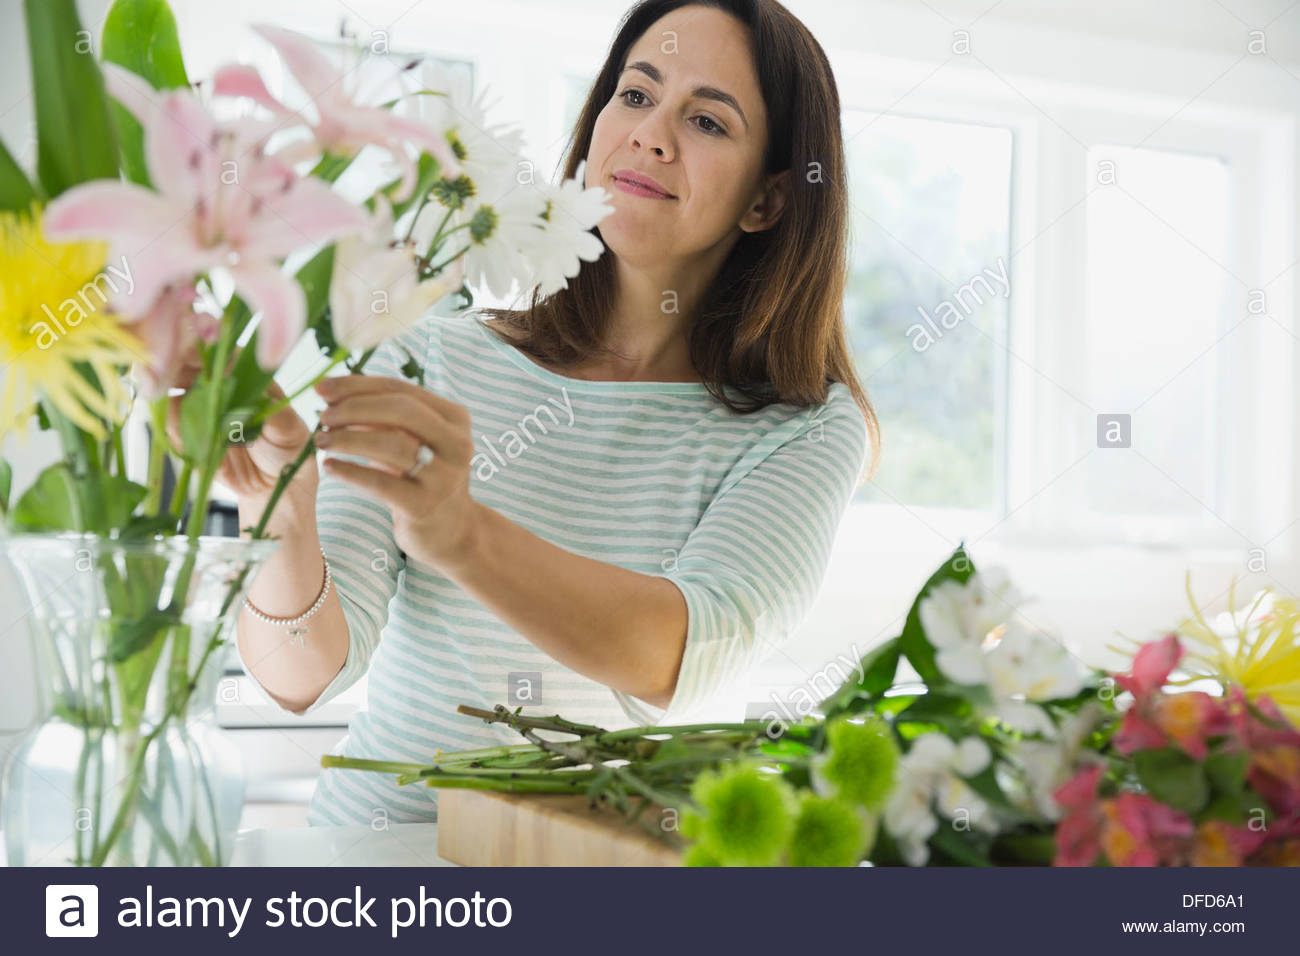 Woman arranging flowers in vase at home Stock Photo